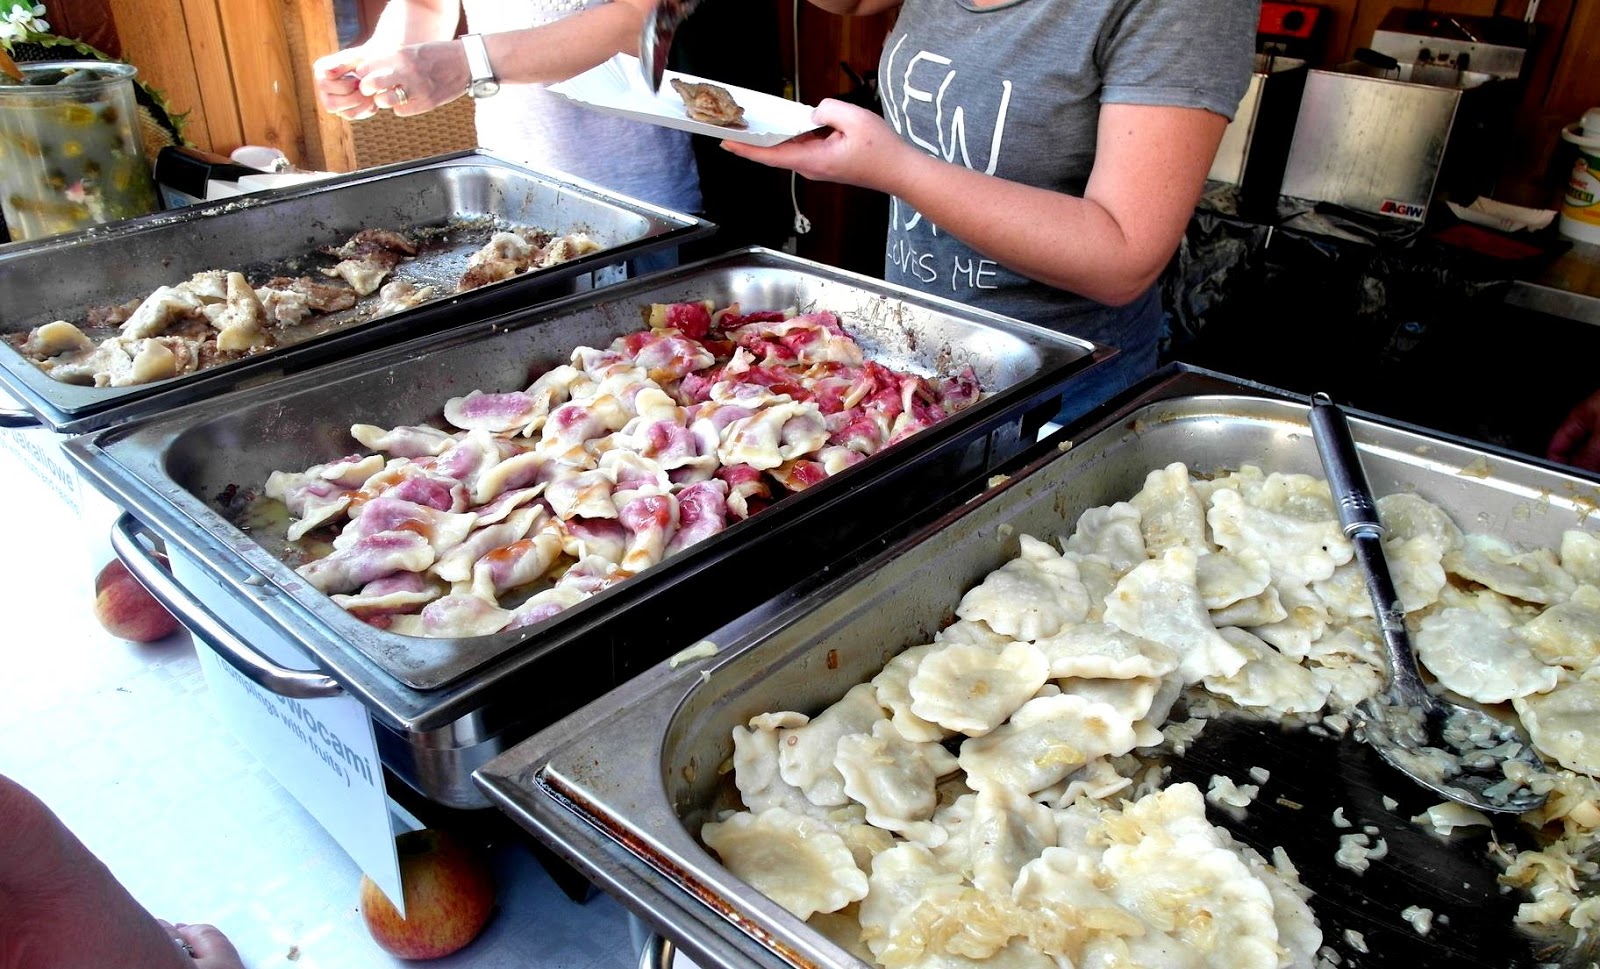 The best of Poland - Pierogi. I couln't miss such a chance to be in Krakow during The Pierogi National Day, Aprol 2016